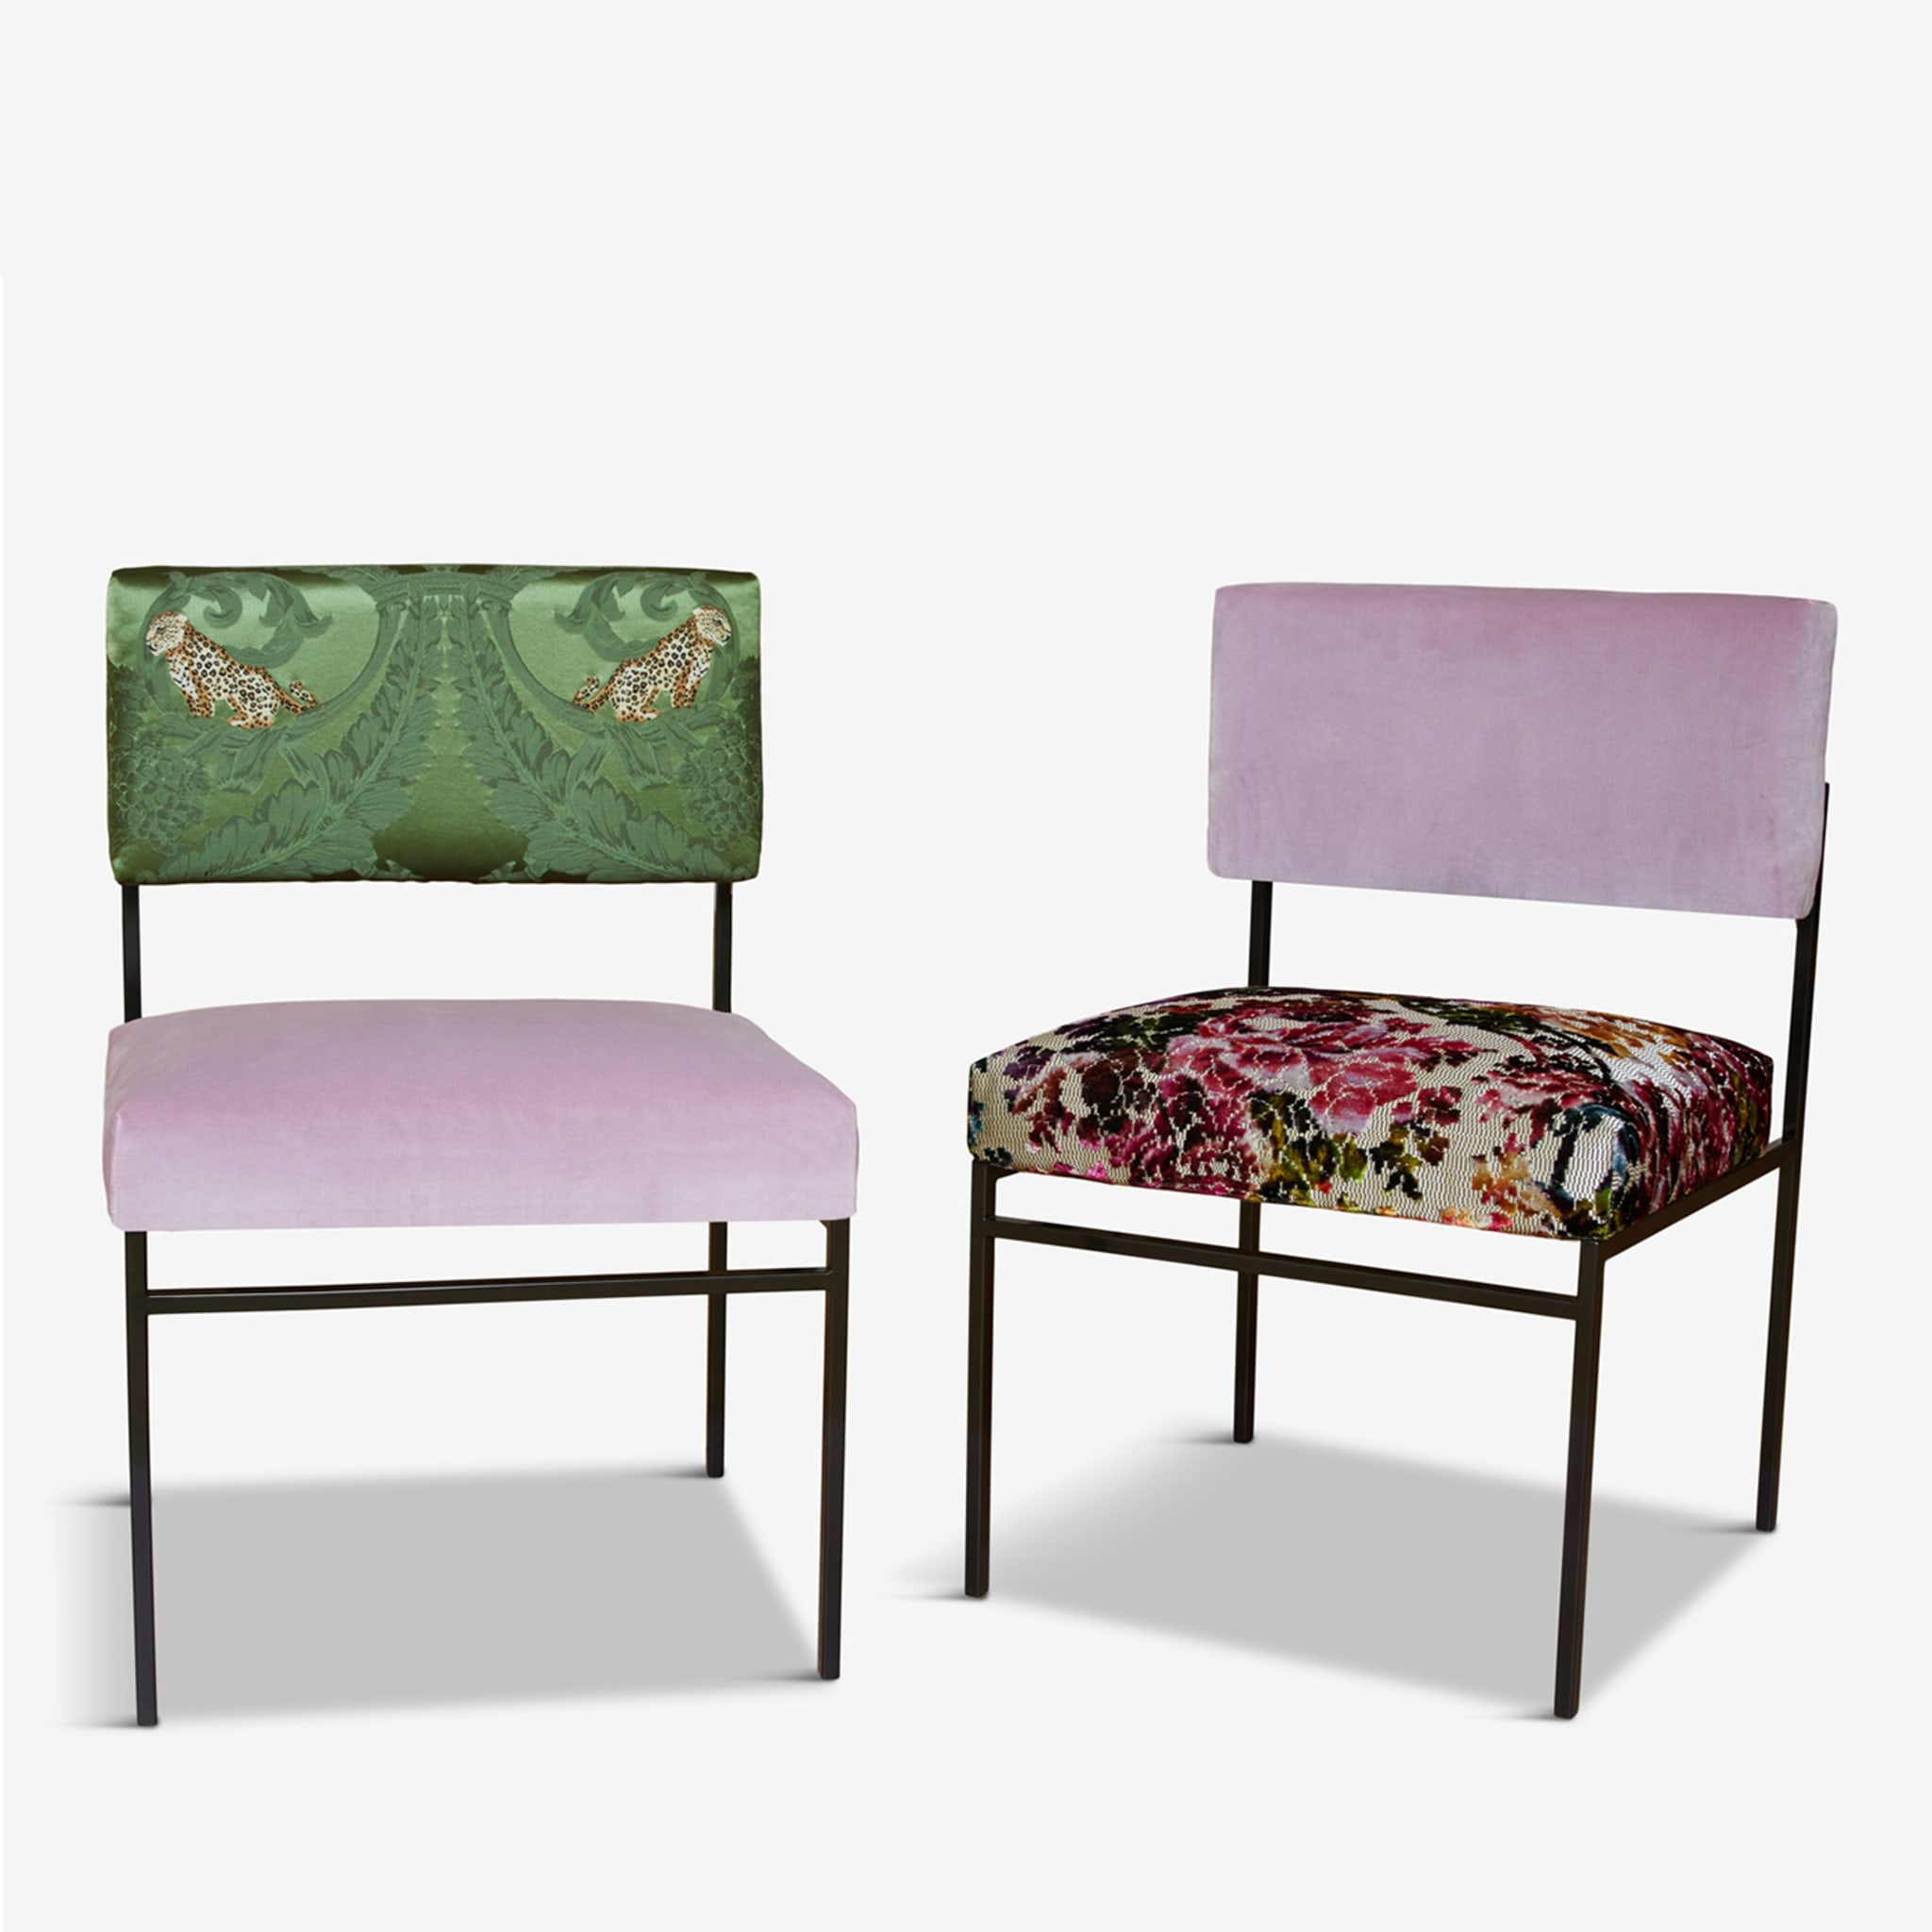 Set of 2 Dreamy Afternoon Aurea Dining Chairs - Alternative view 1